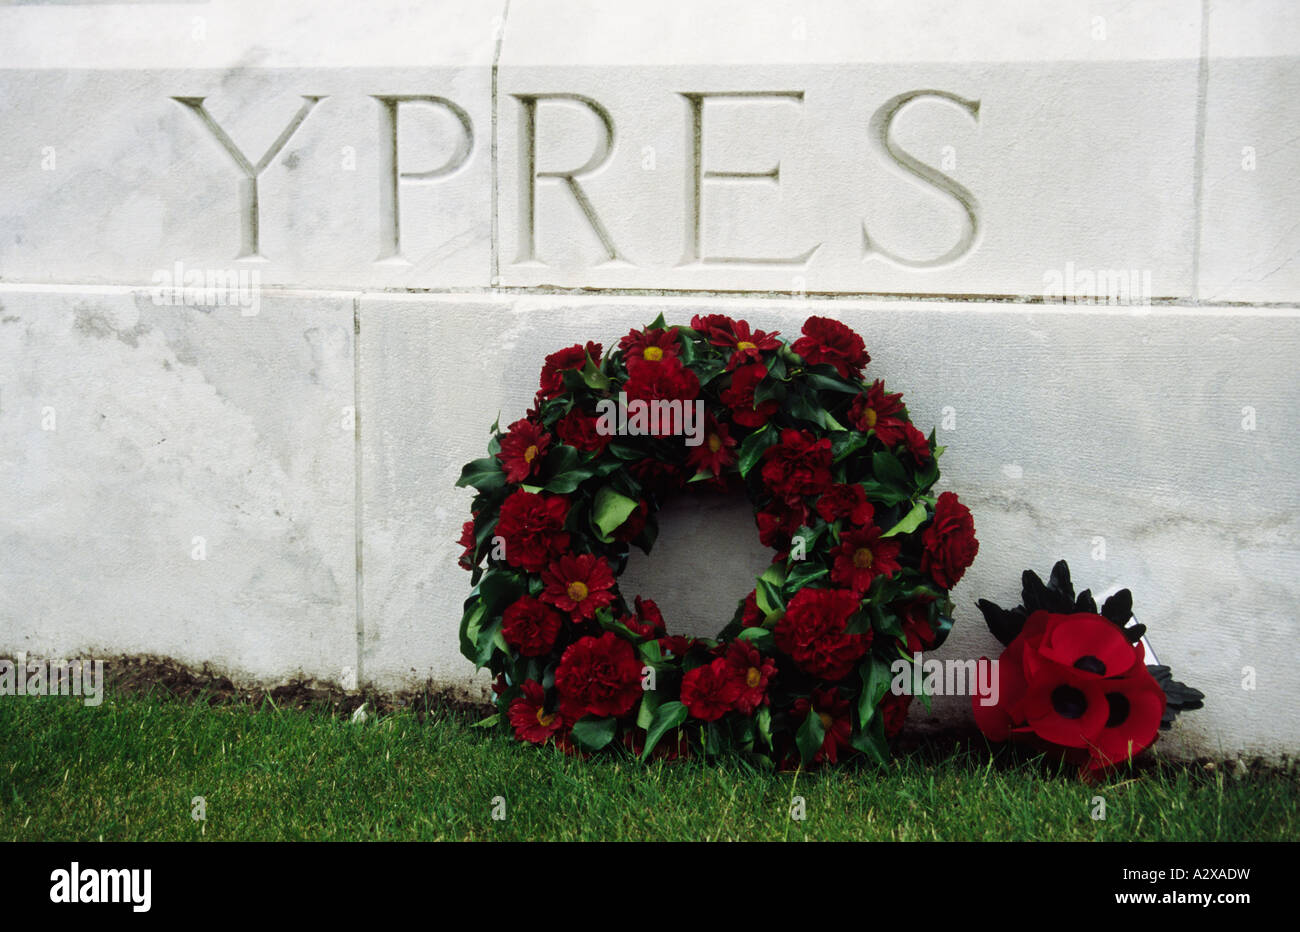 Wreath under the word Ypres carved in stone Tyne Cot British cemetery Belgium Stock Photo